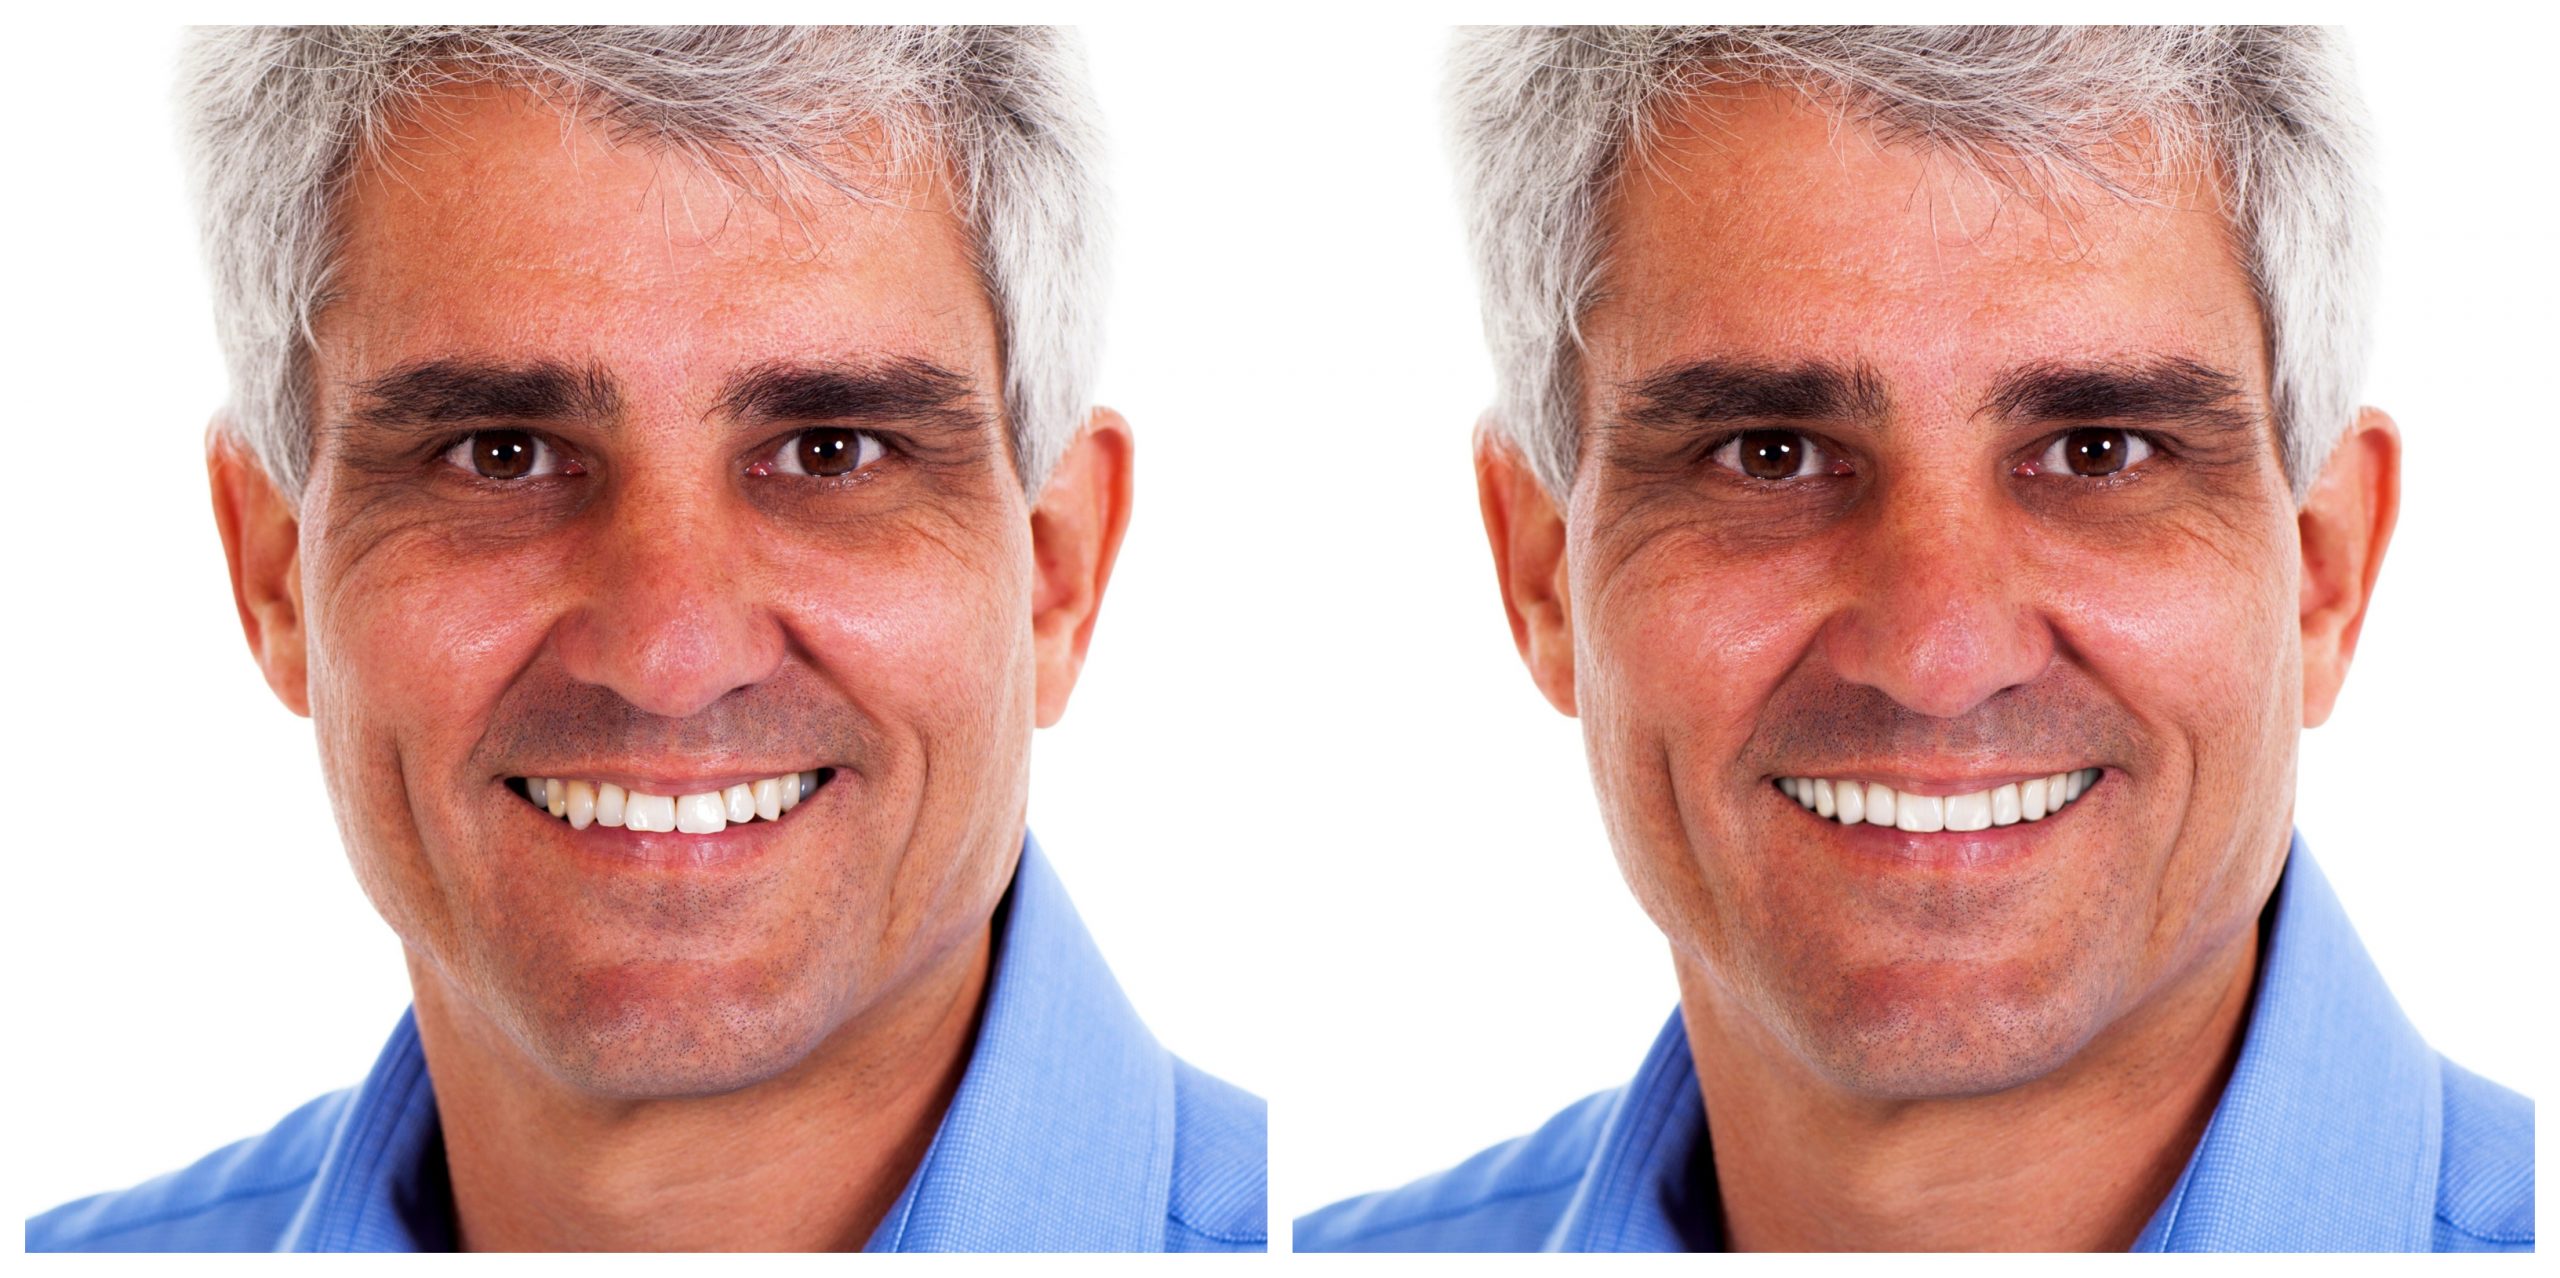 Smile Restoration - Before and After20